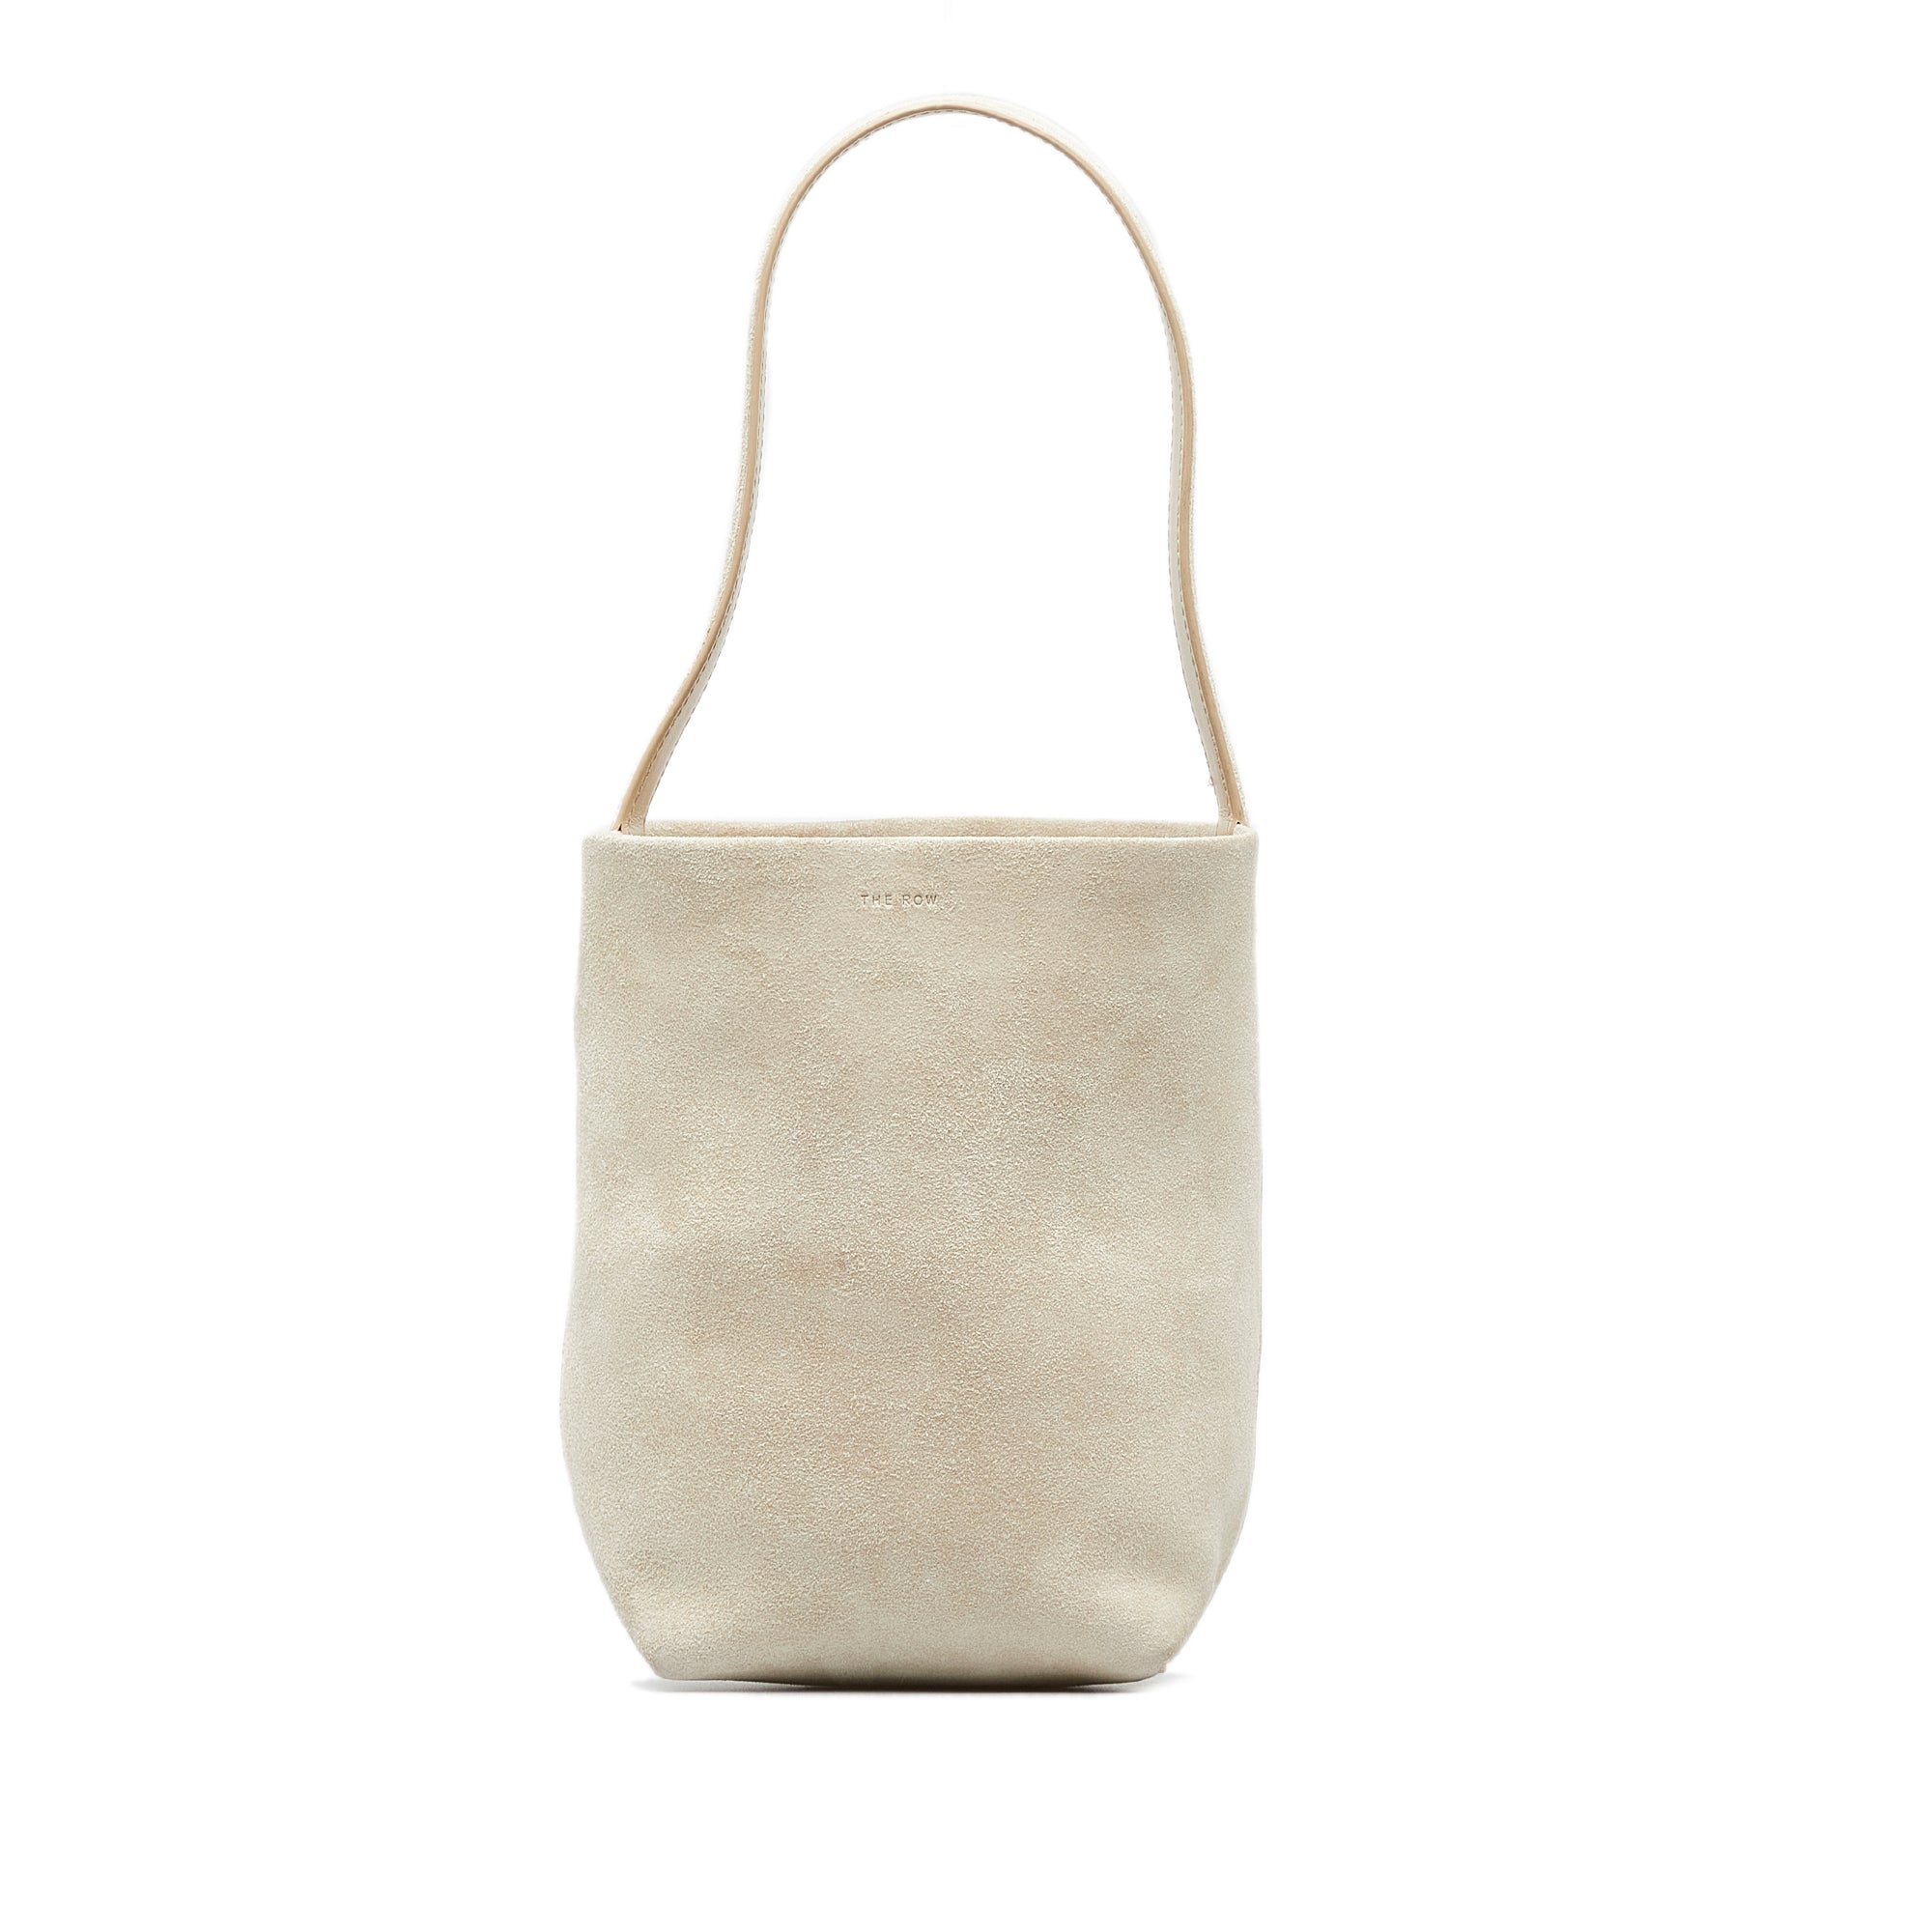 N/S Park small leather tote